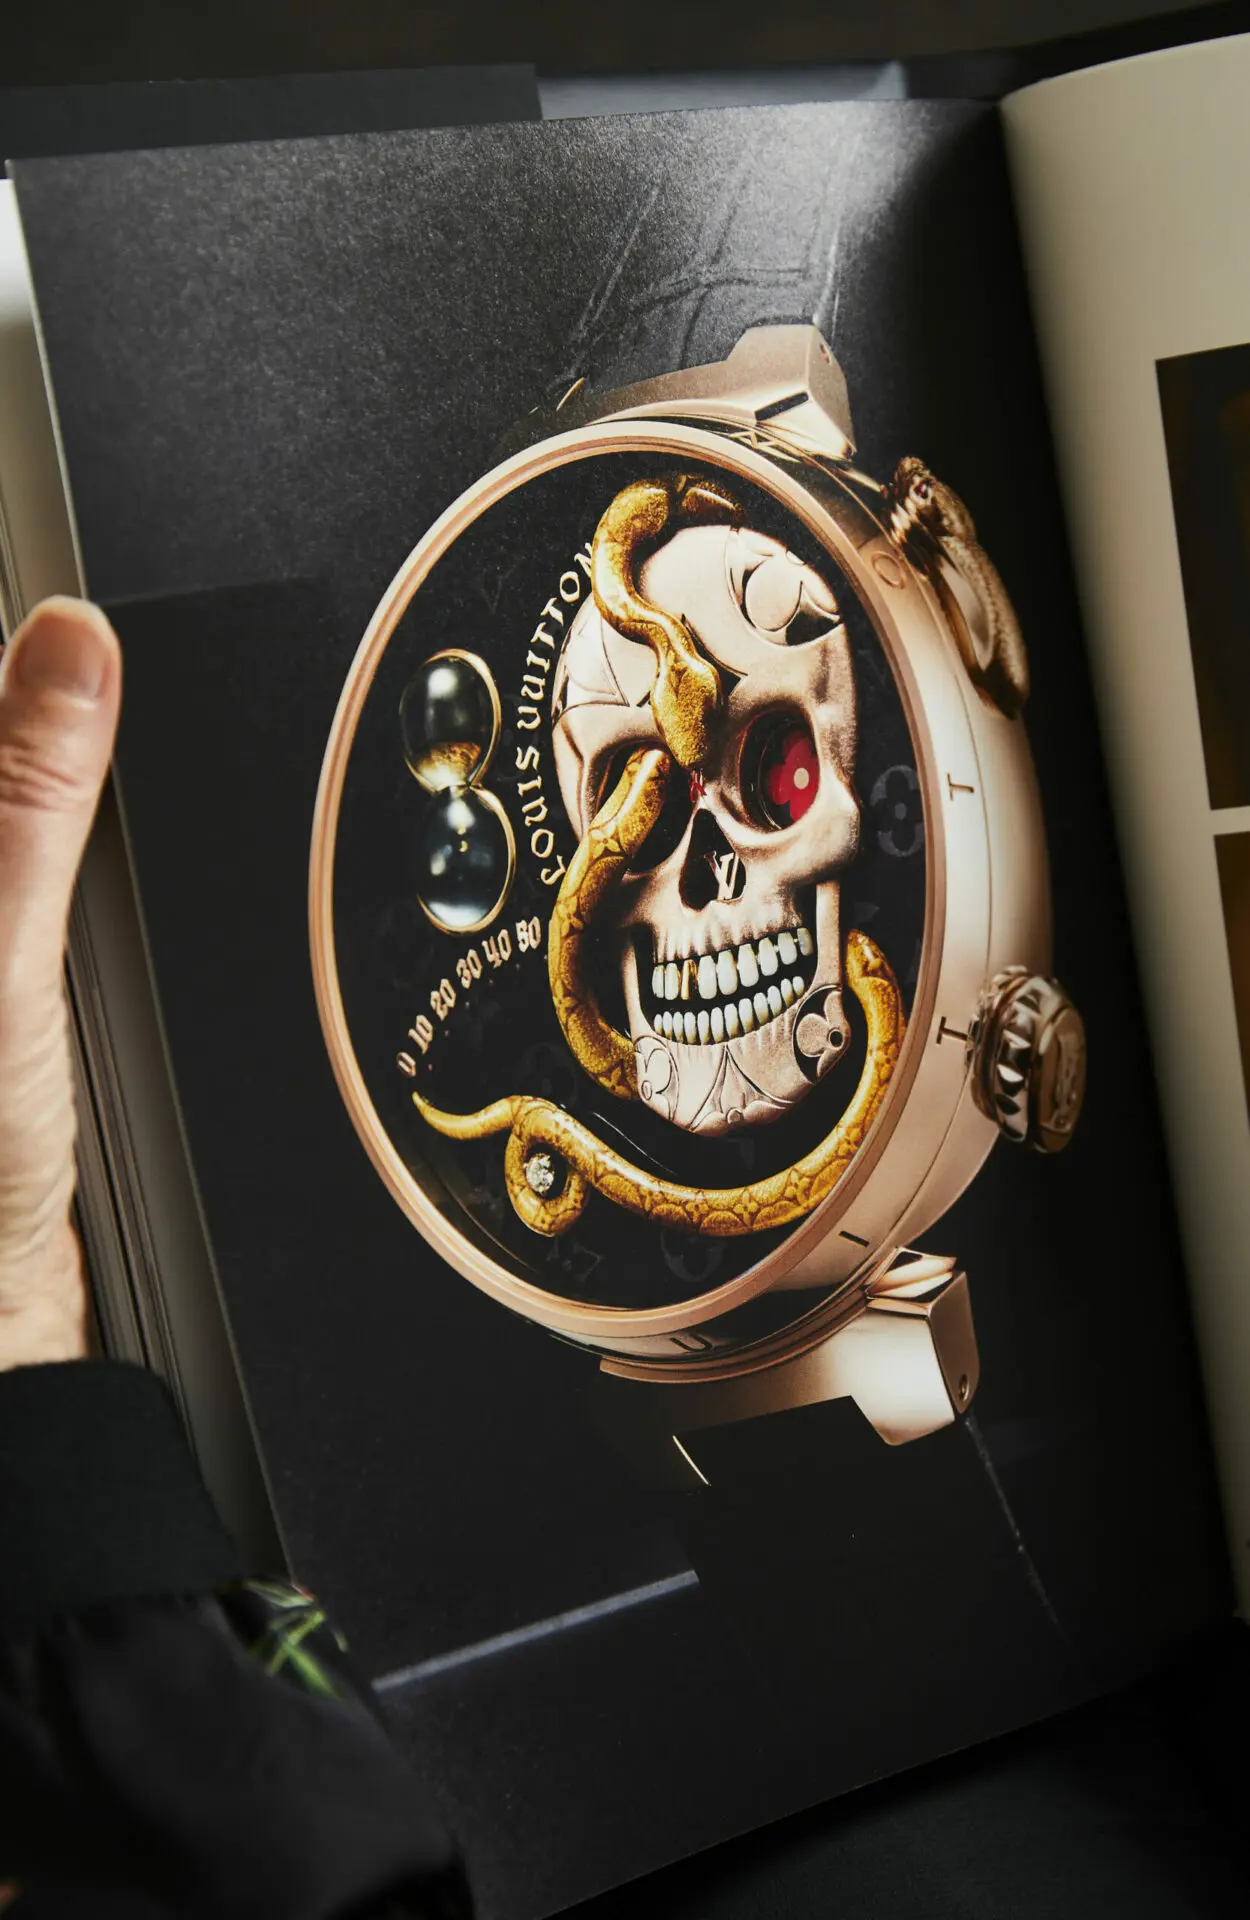 Louis Vuitton Tambour, English Version - Art of Living - Books and